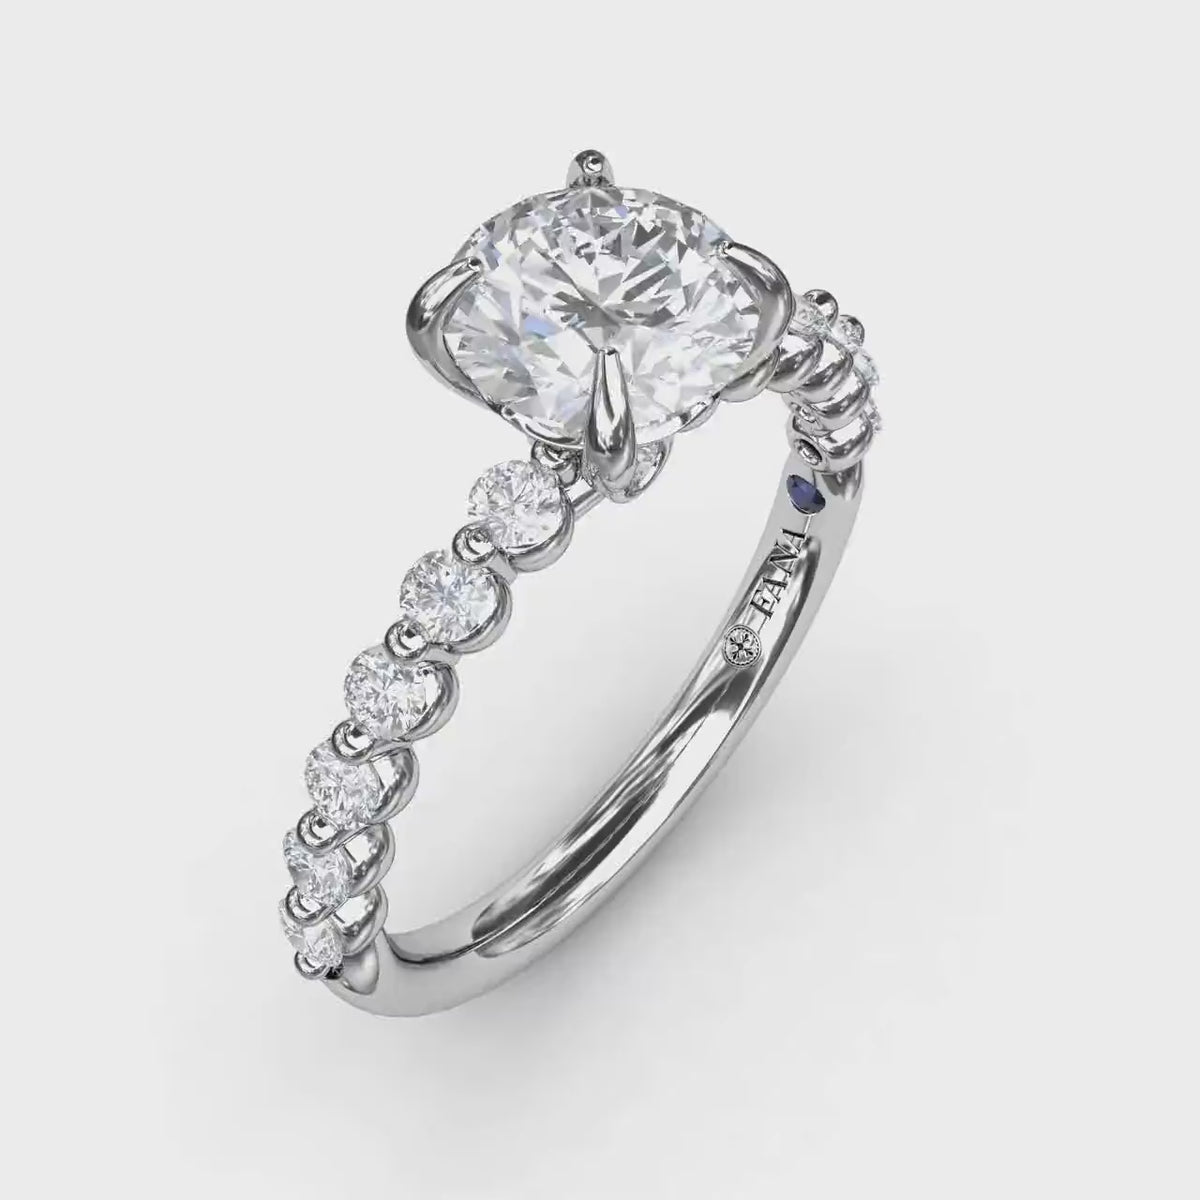 Fana - Contemporary Round Diamond Solitaire Engagement Ring With Diamond Band - S3244 - Available in 14K & 18K Gold (White, Yellow or Rose) and Platinum